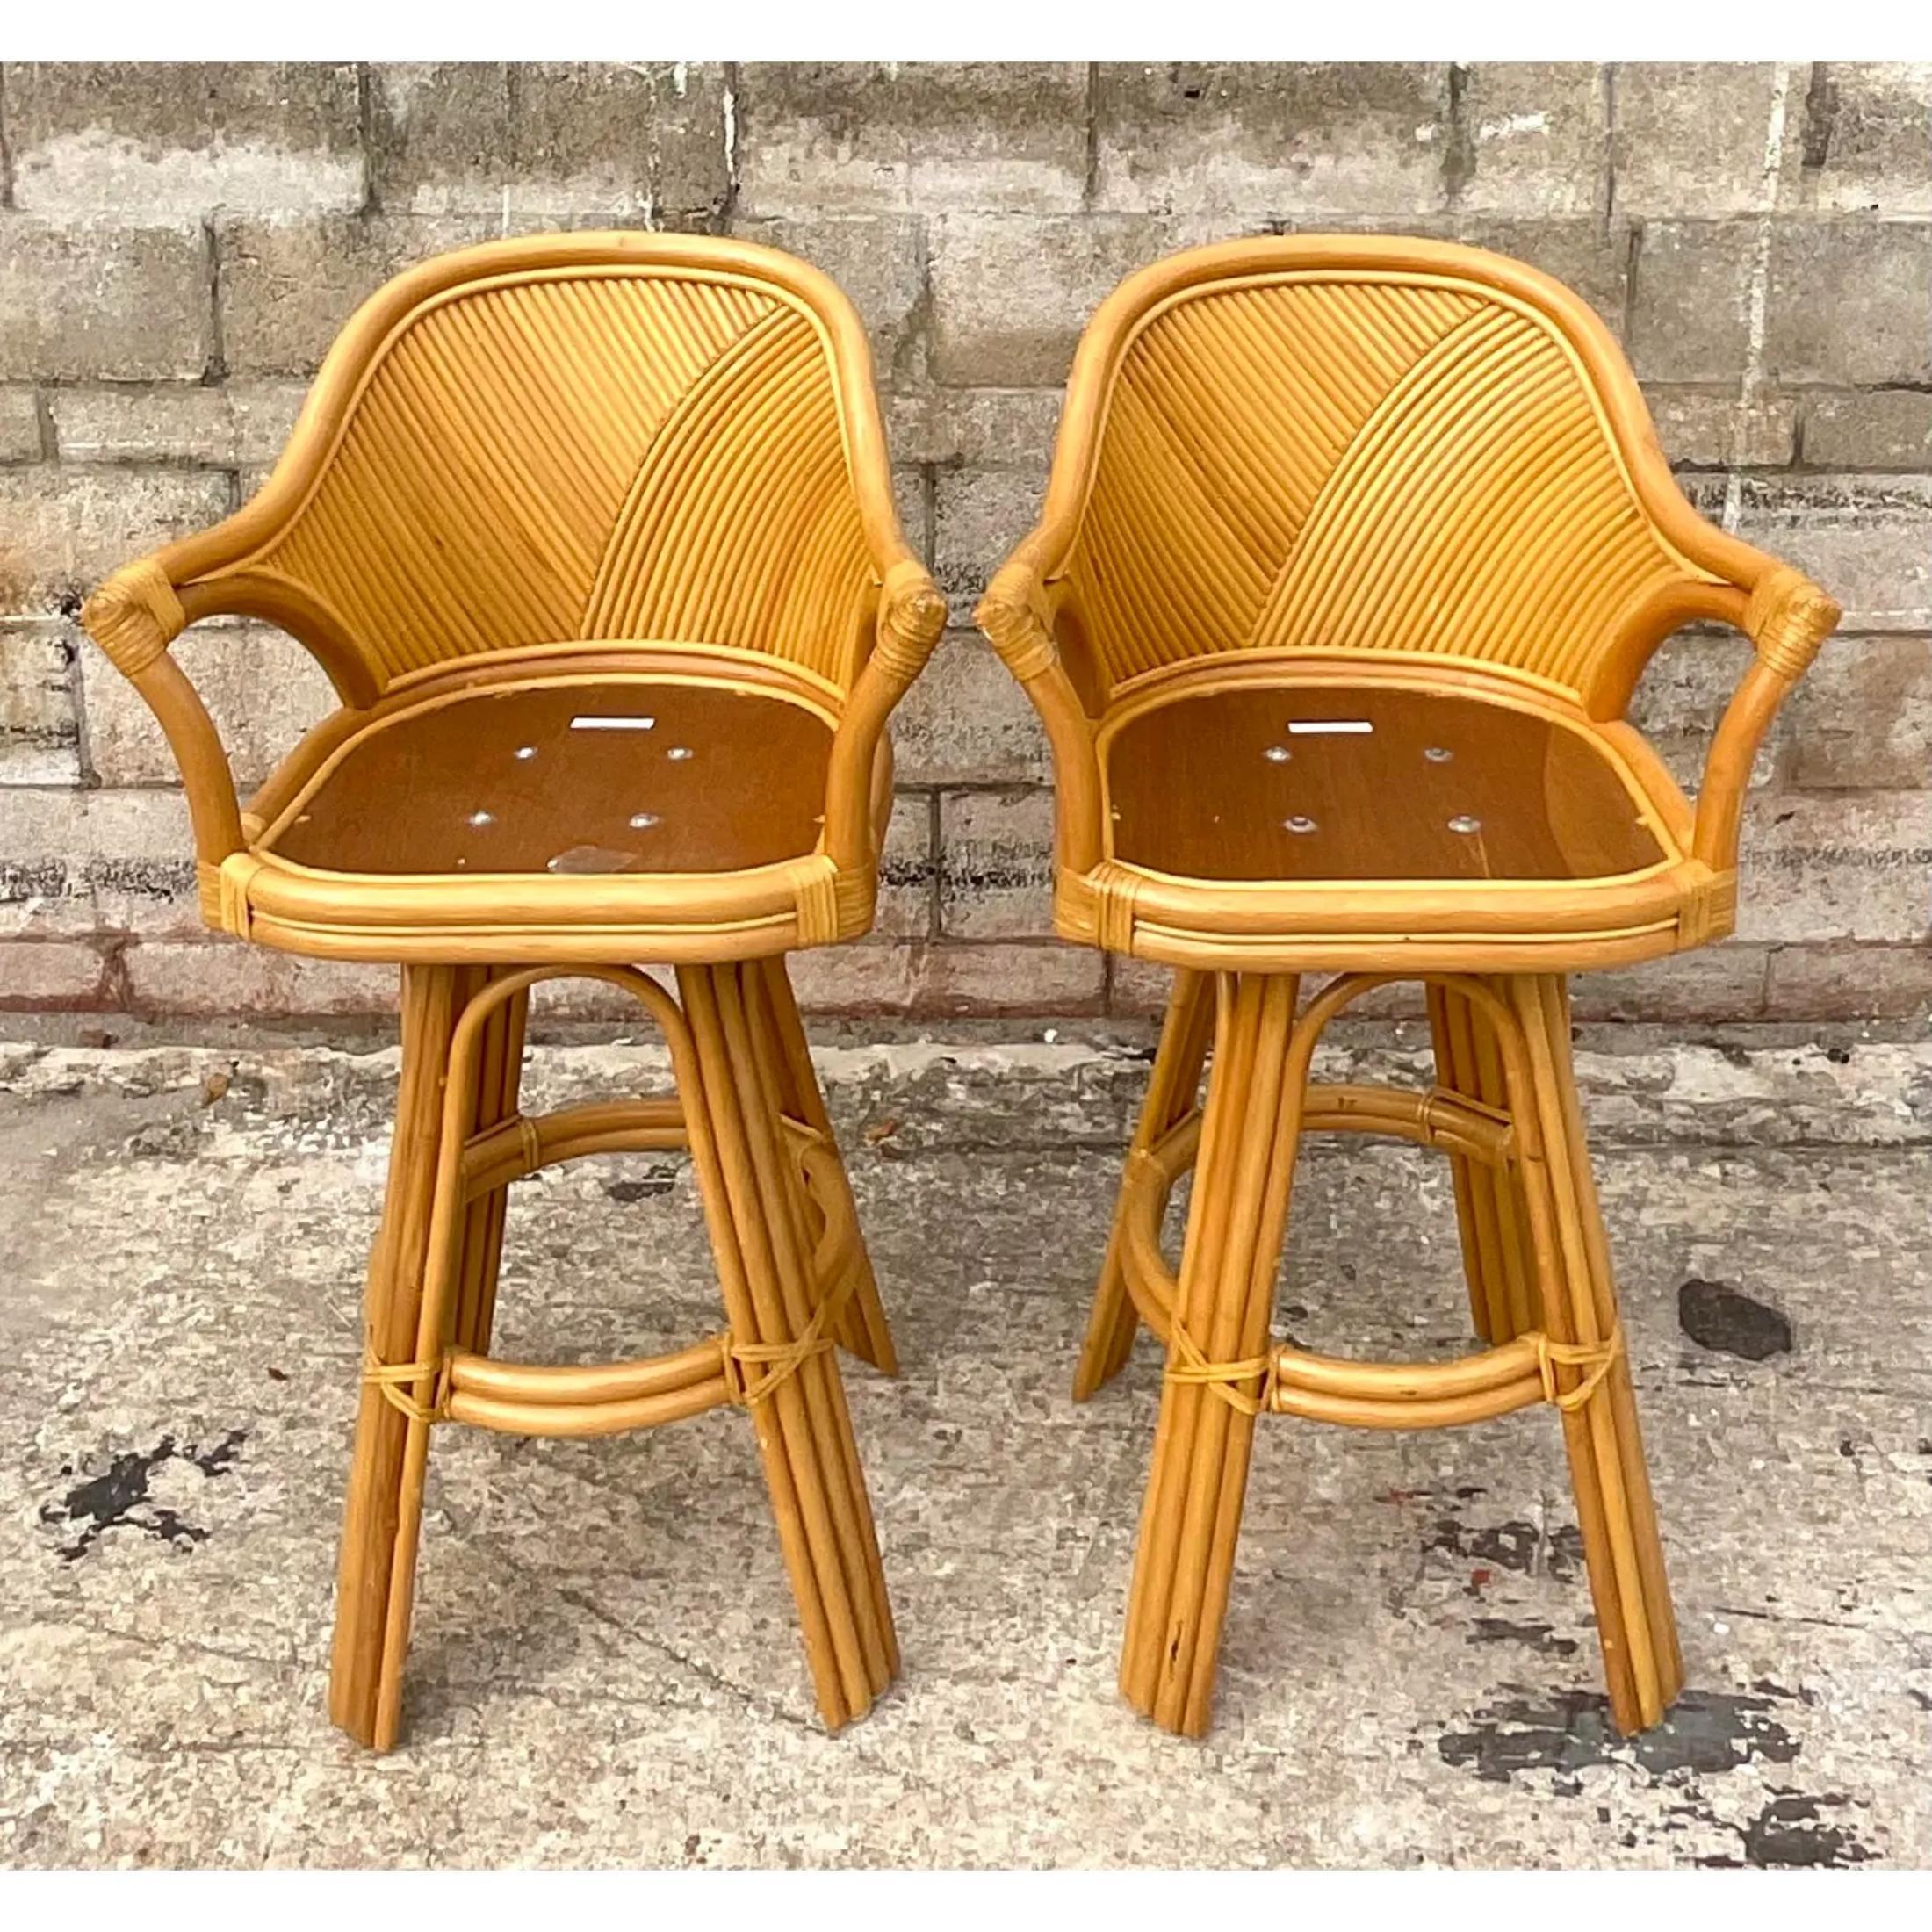 Vintage Coastal Pretzel Reed Swivel Barstools - a Pair In Good Condition For Sale In west palm beach, FL